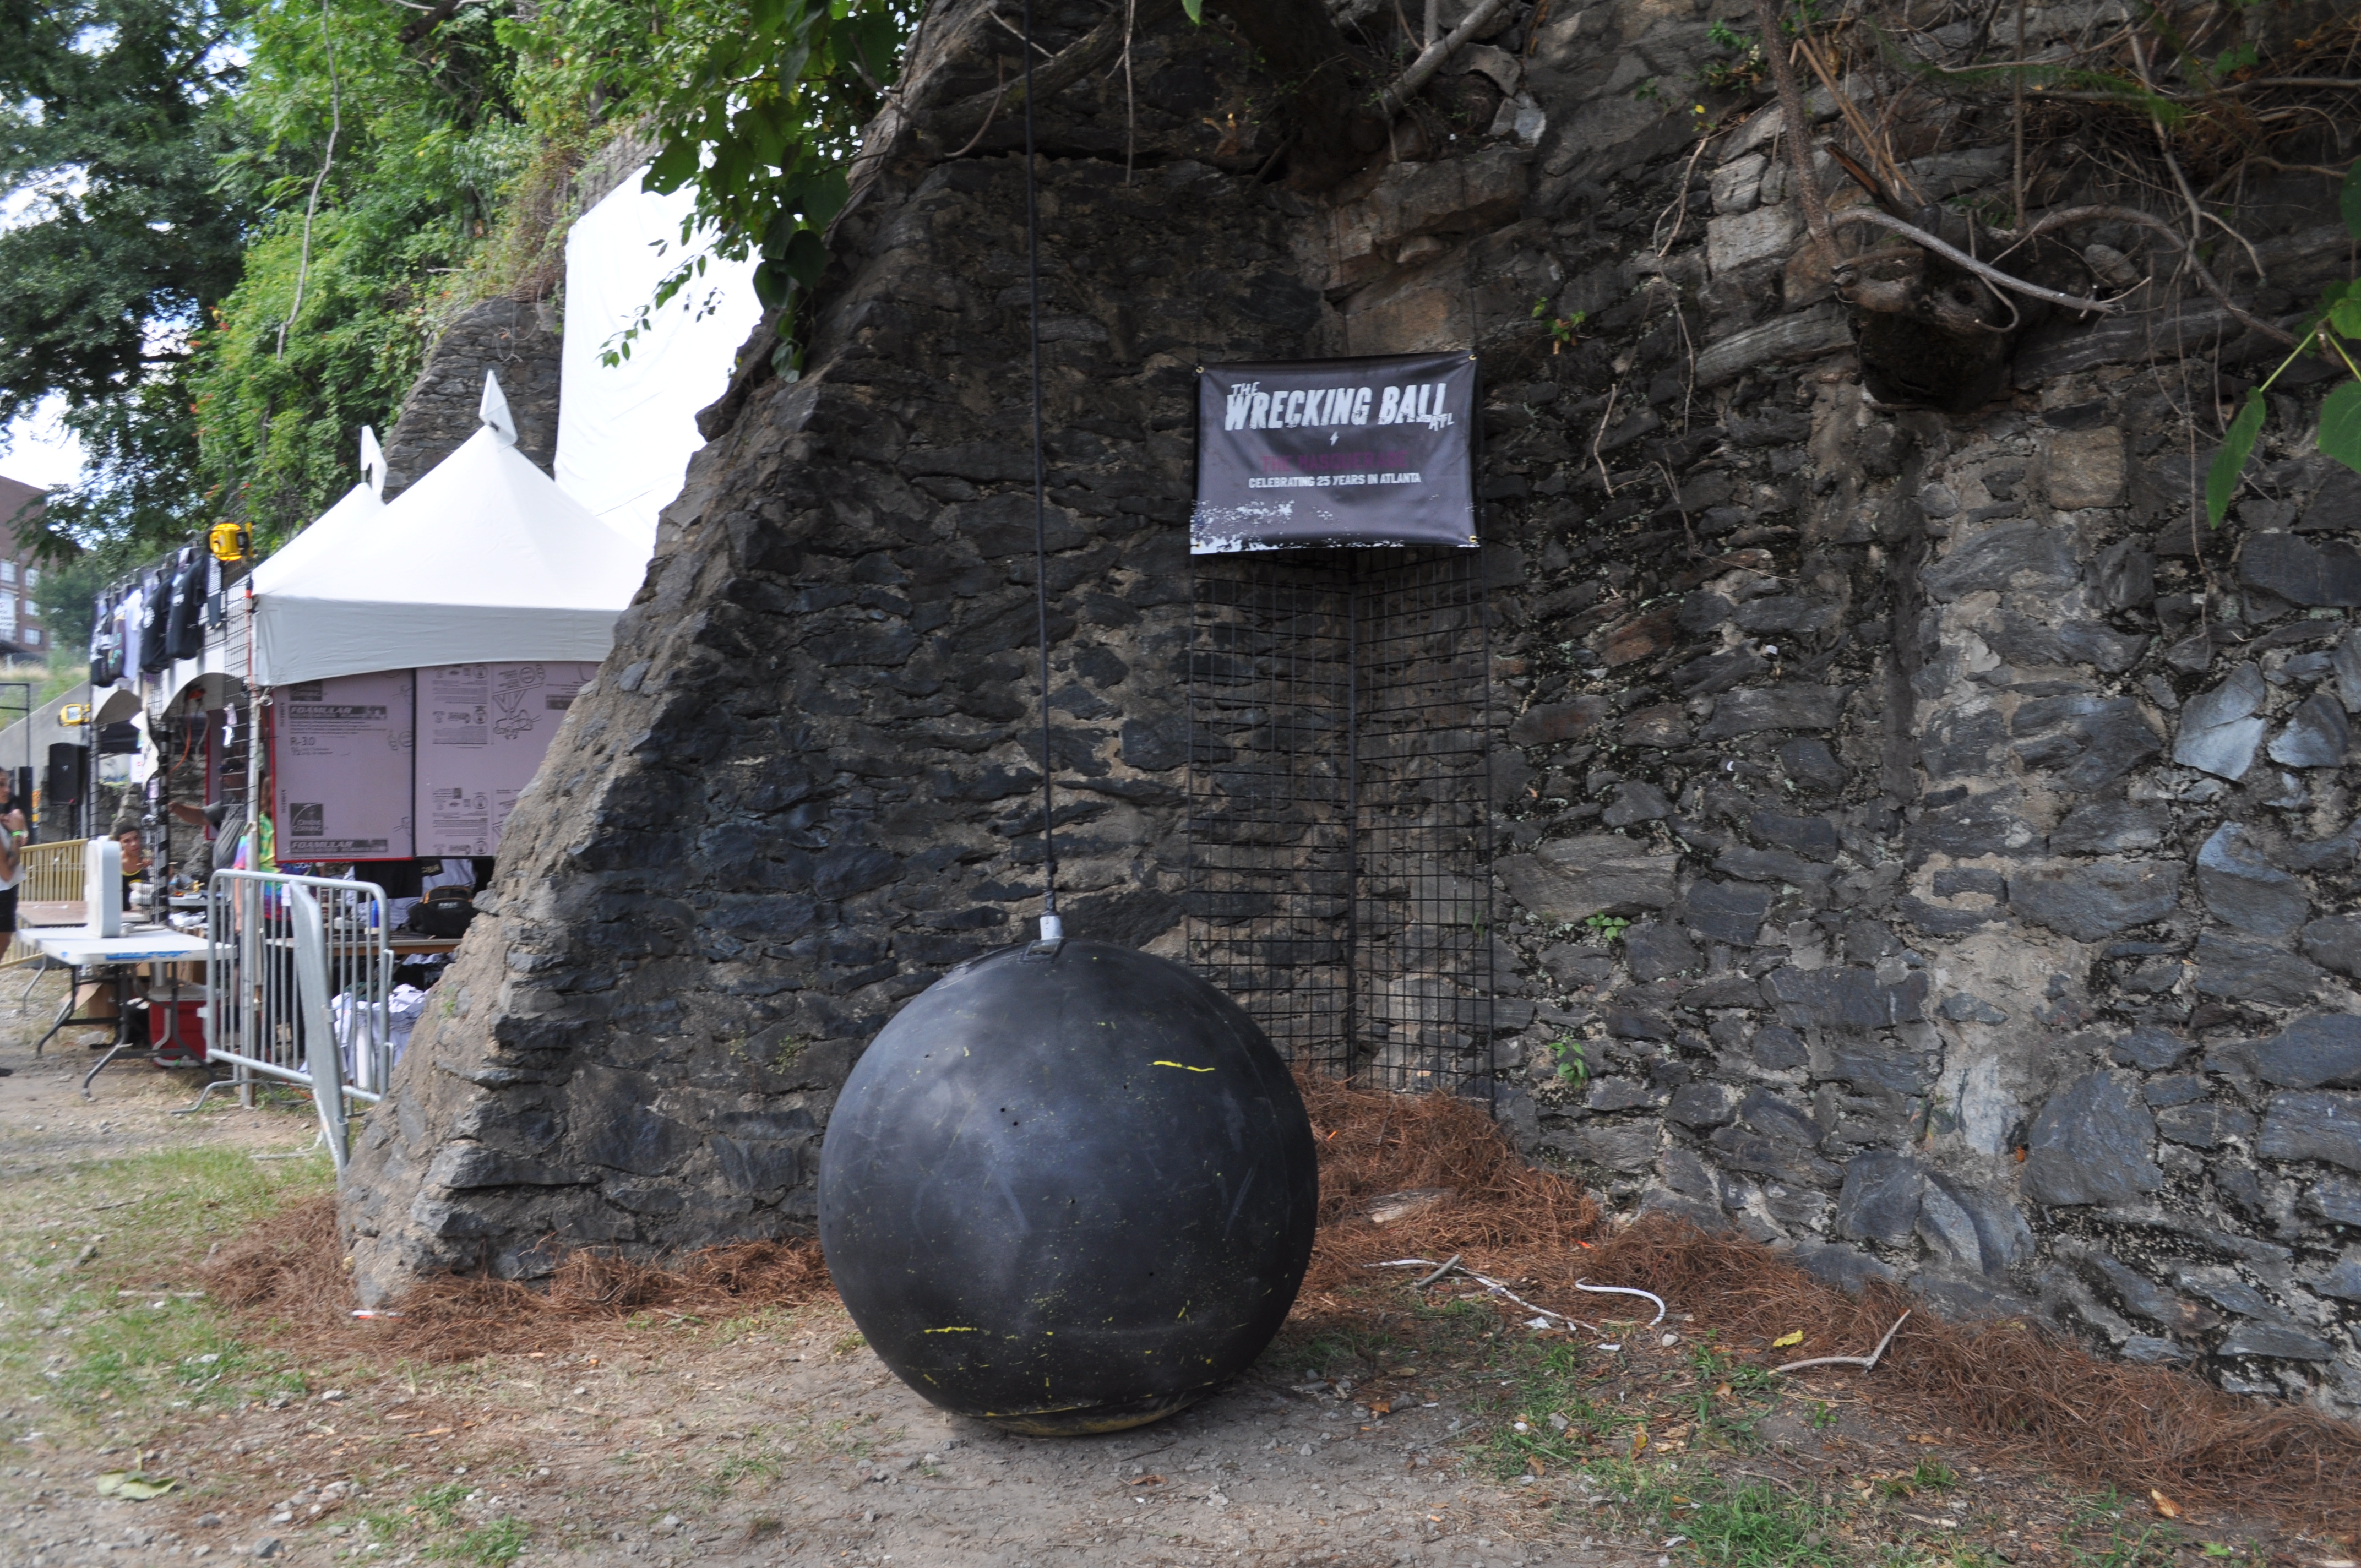 Concert goers were able to swing on a wrecking ball and take photos.